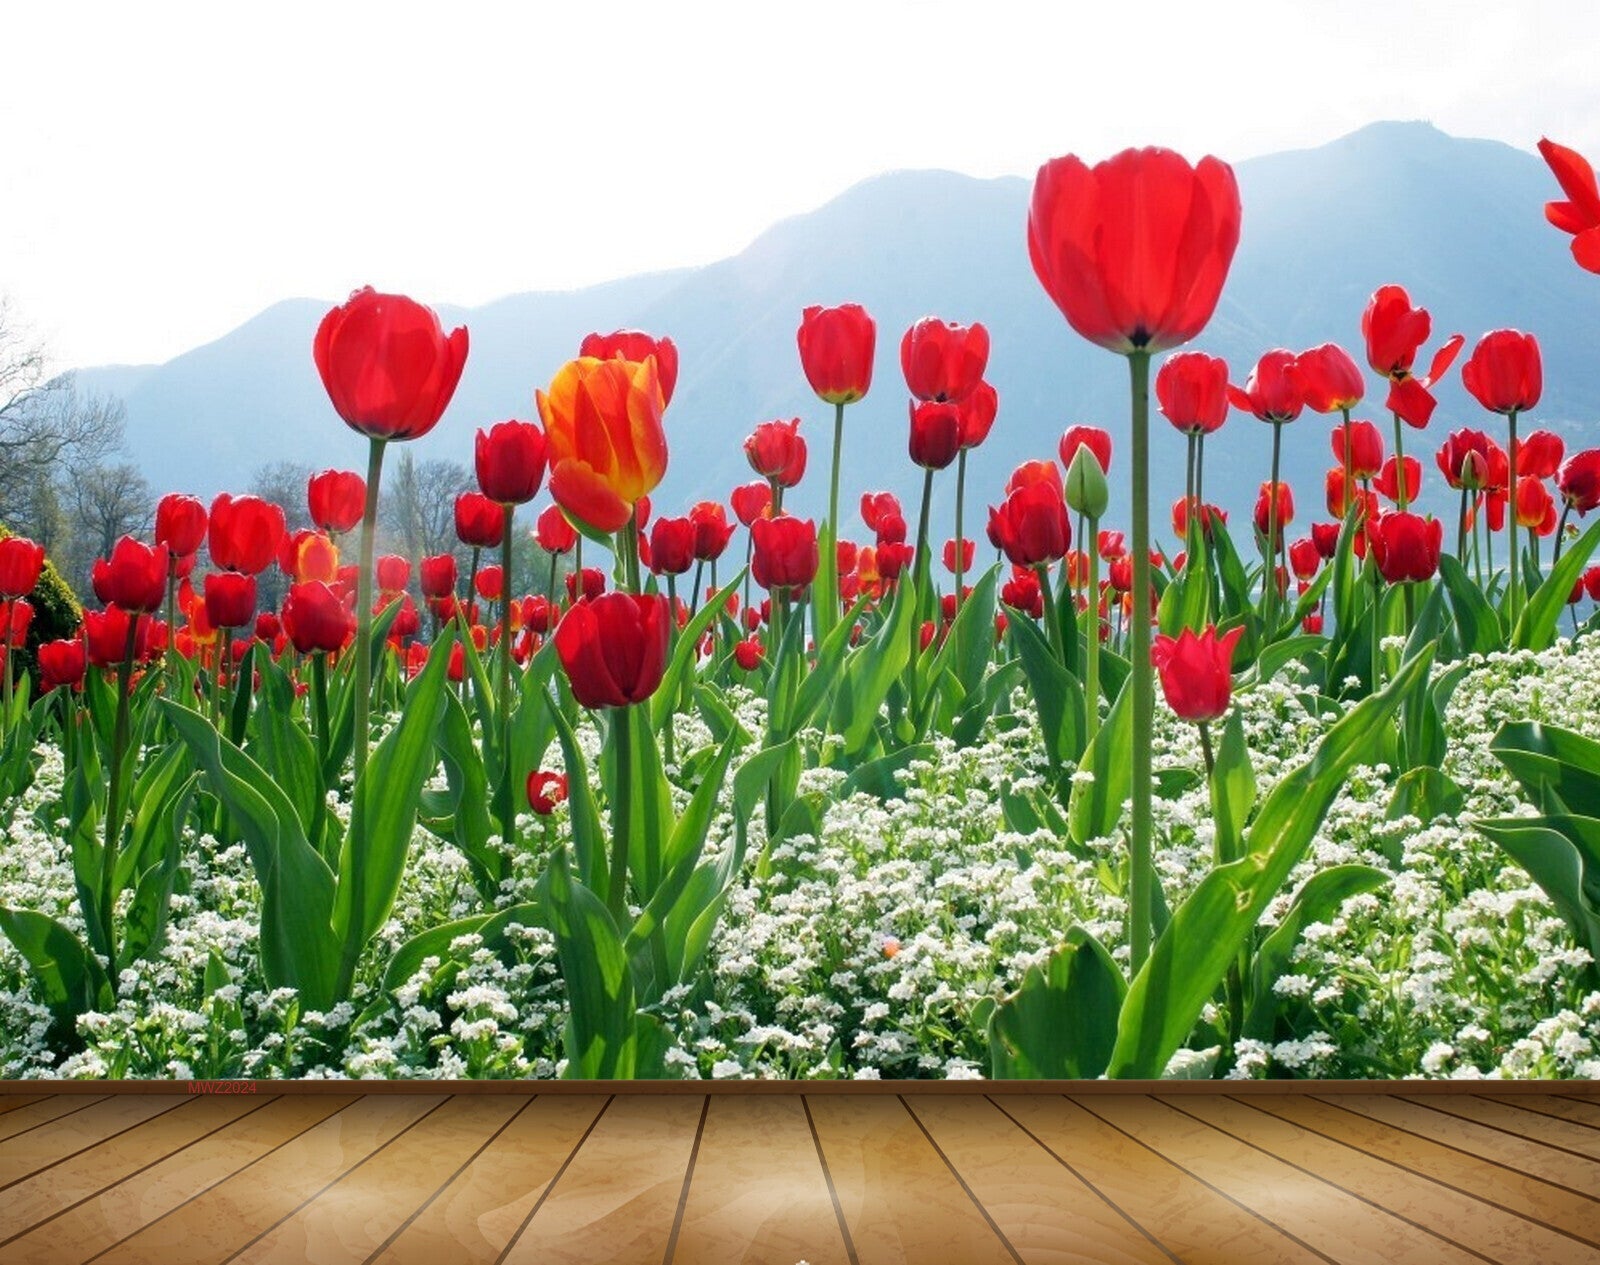 Mobile Hd Beautiful Flowers Tulips Background Images